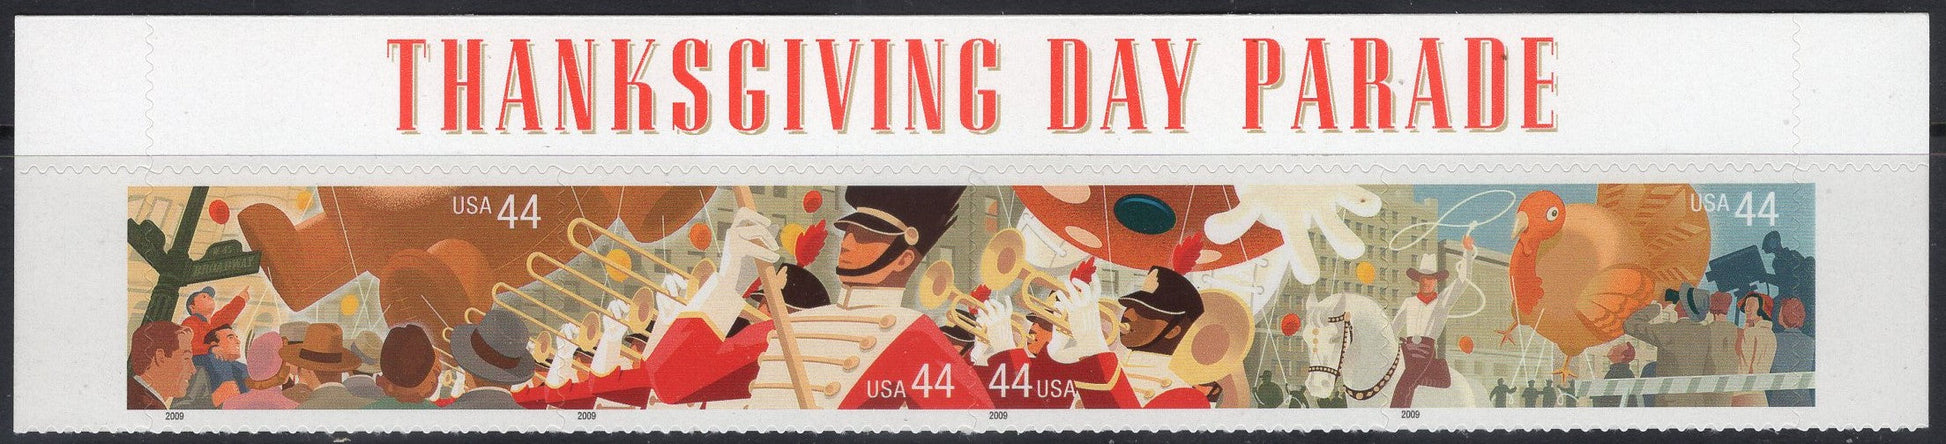 THANKSGIVING PARADE DECORATIVE HEADER STRIP of 4 Stamps - Fresh Bright USA Stamps - Issued in 2009